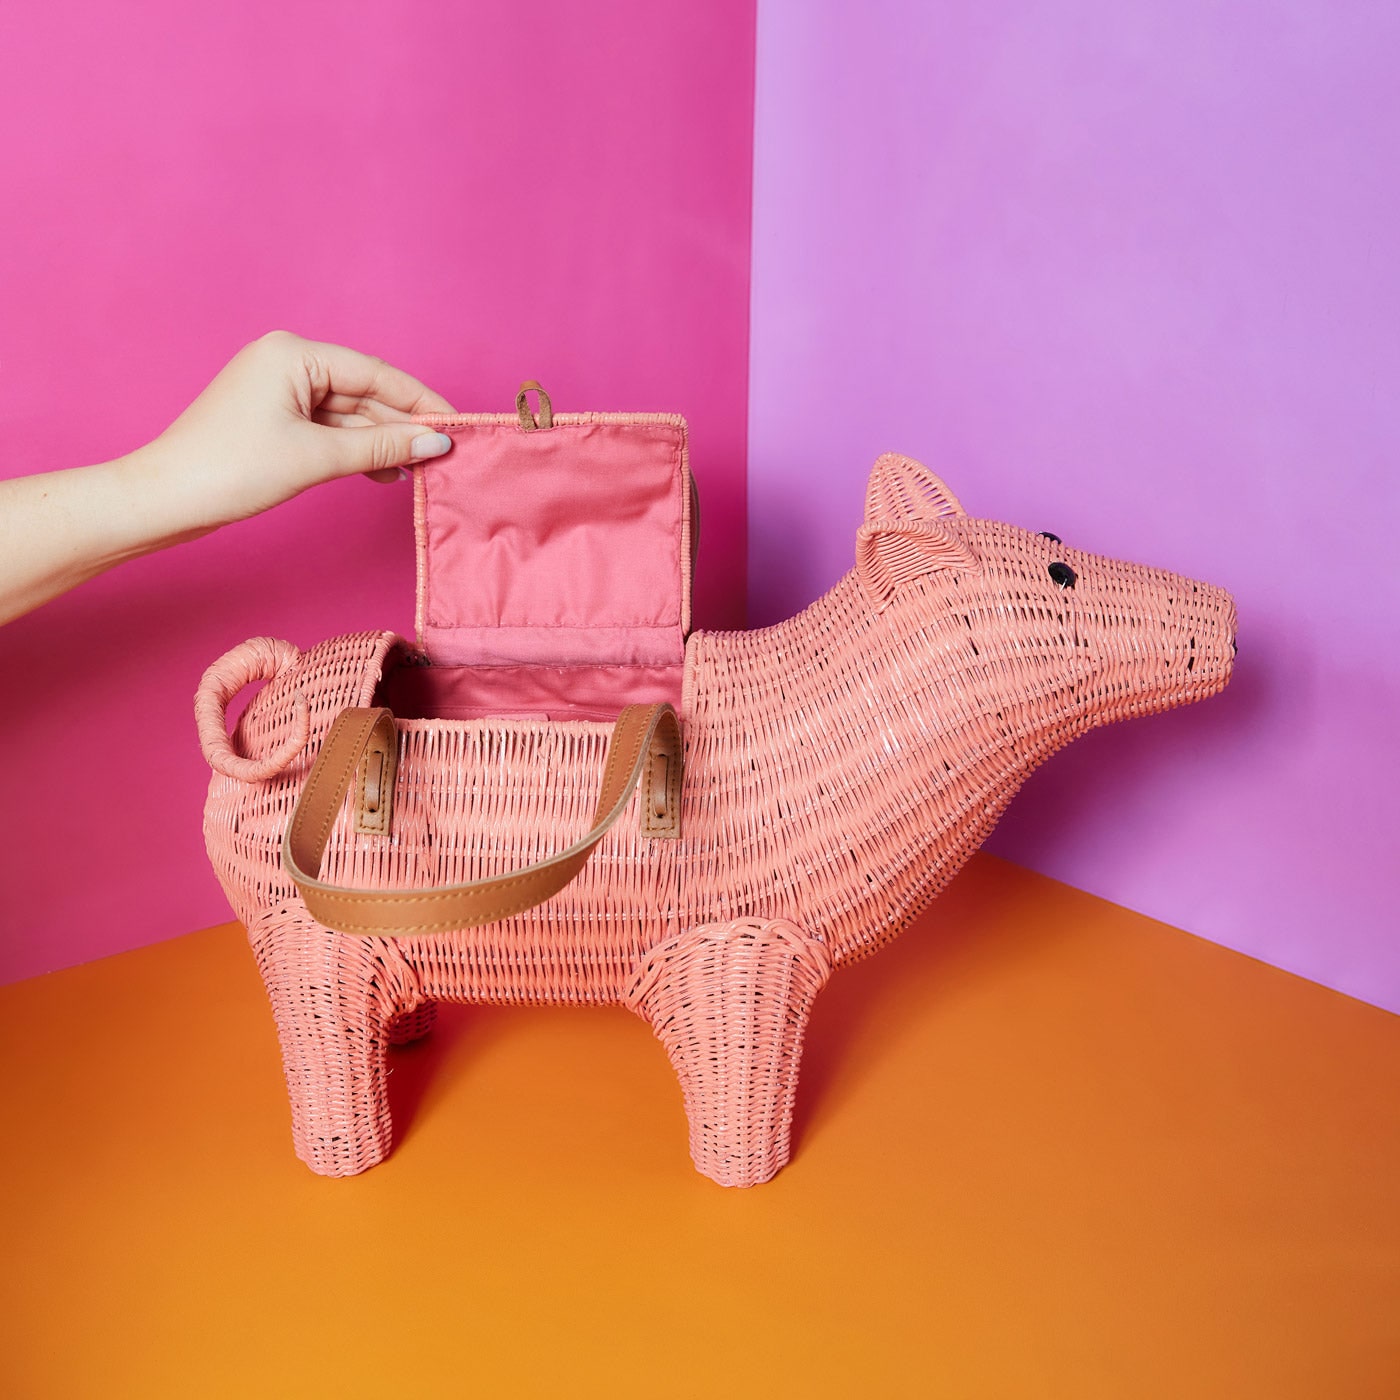 Wicker Darling's Hamlet Hambag the pig purse on a colourful background